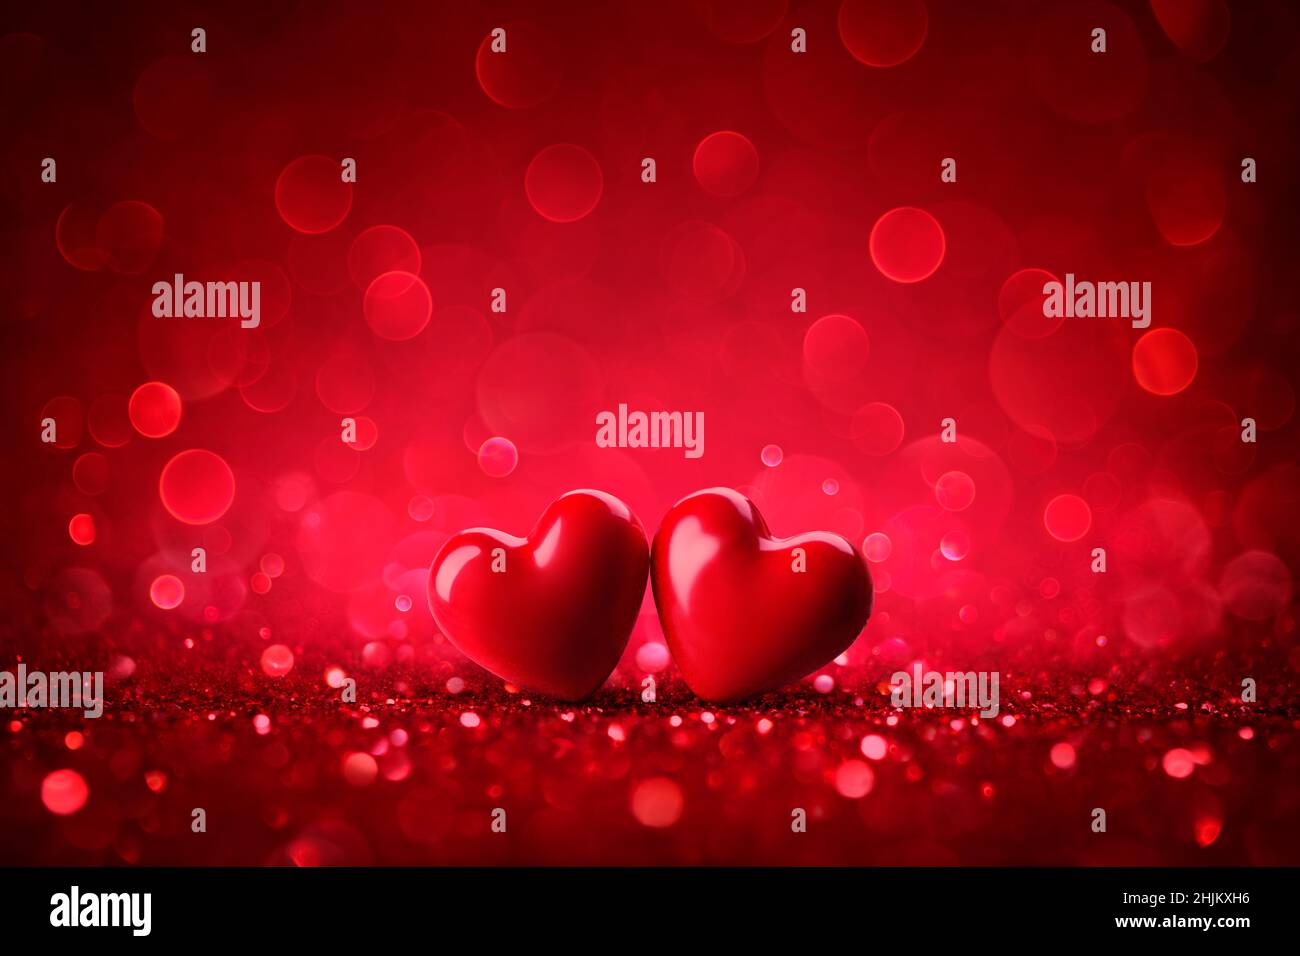 Valentines Red Hearts On Shiny Glitter Background With Defocused Abstract Lights Stock Photo